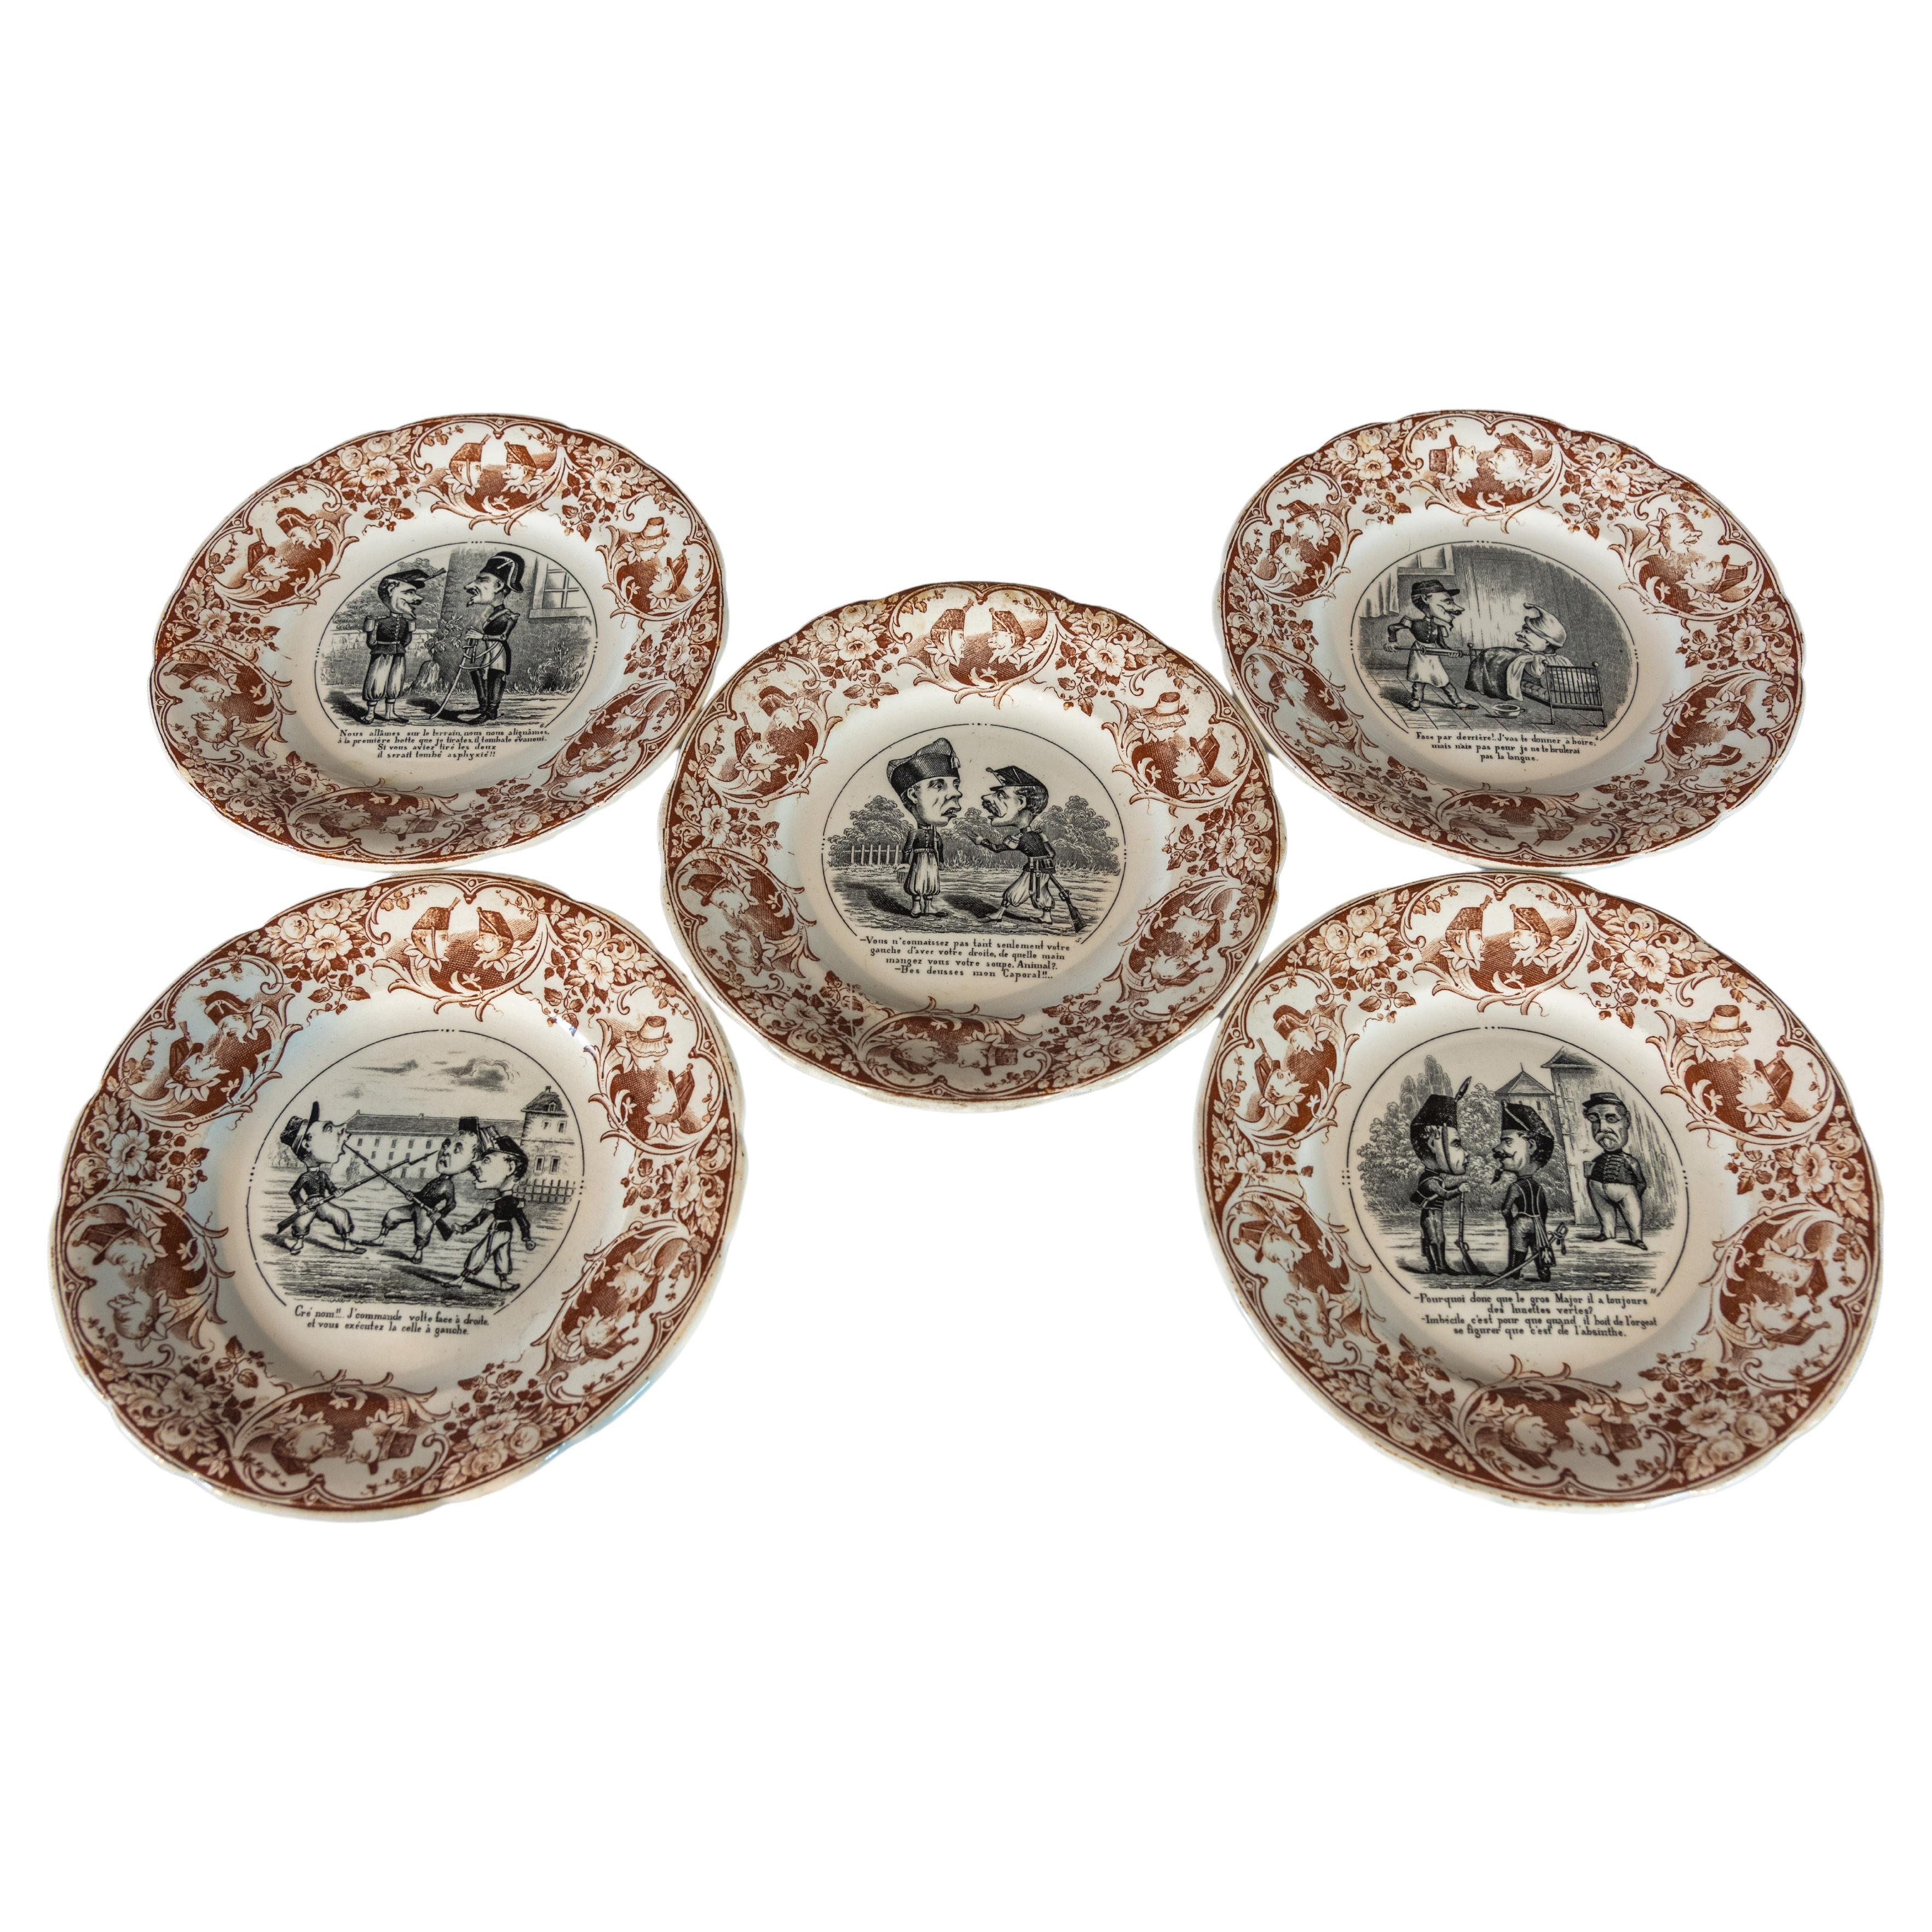 19th Century French "Comique" Plates By Sarreguemines For Sale